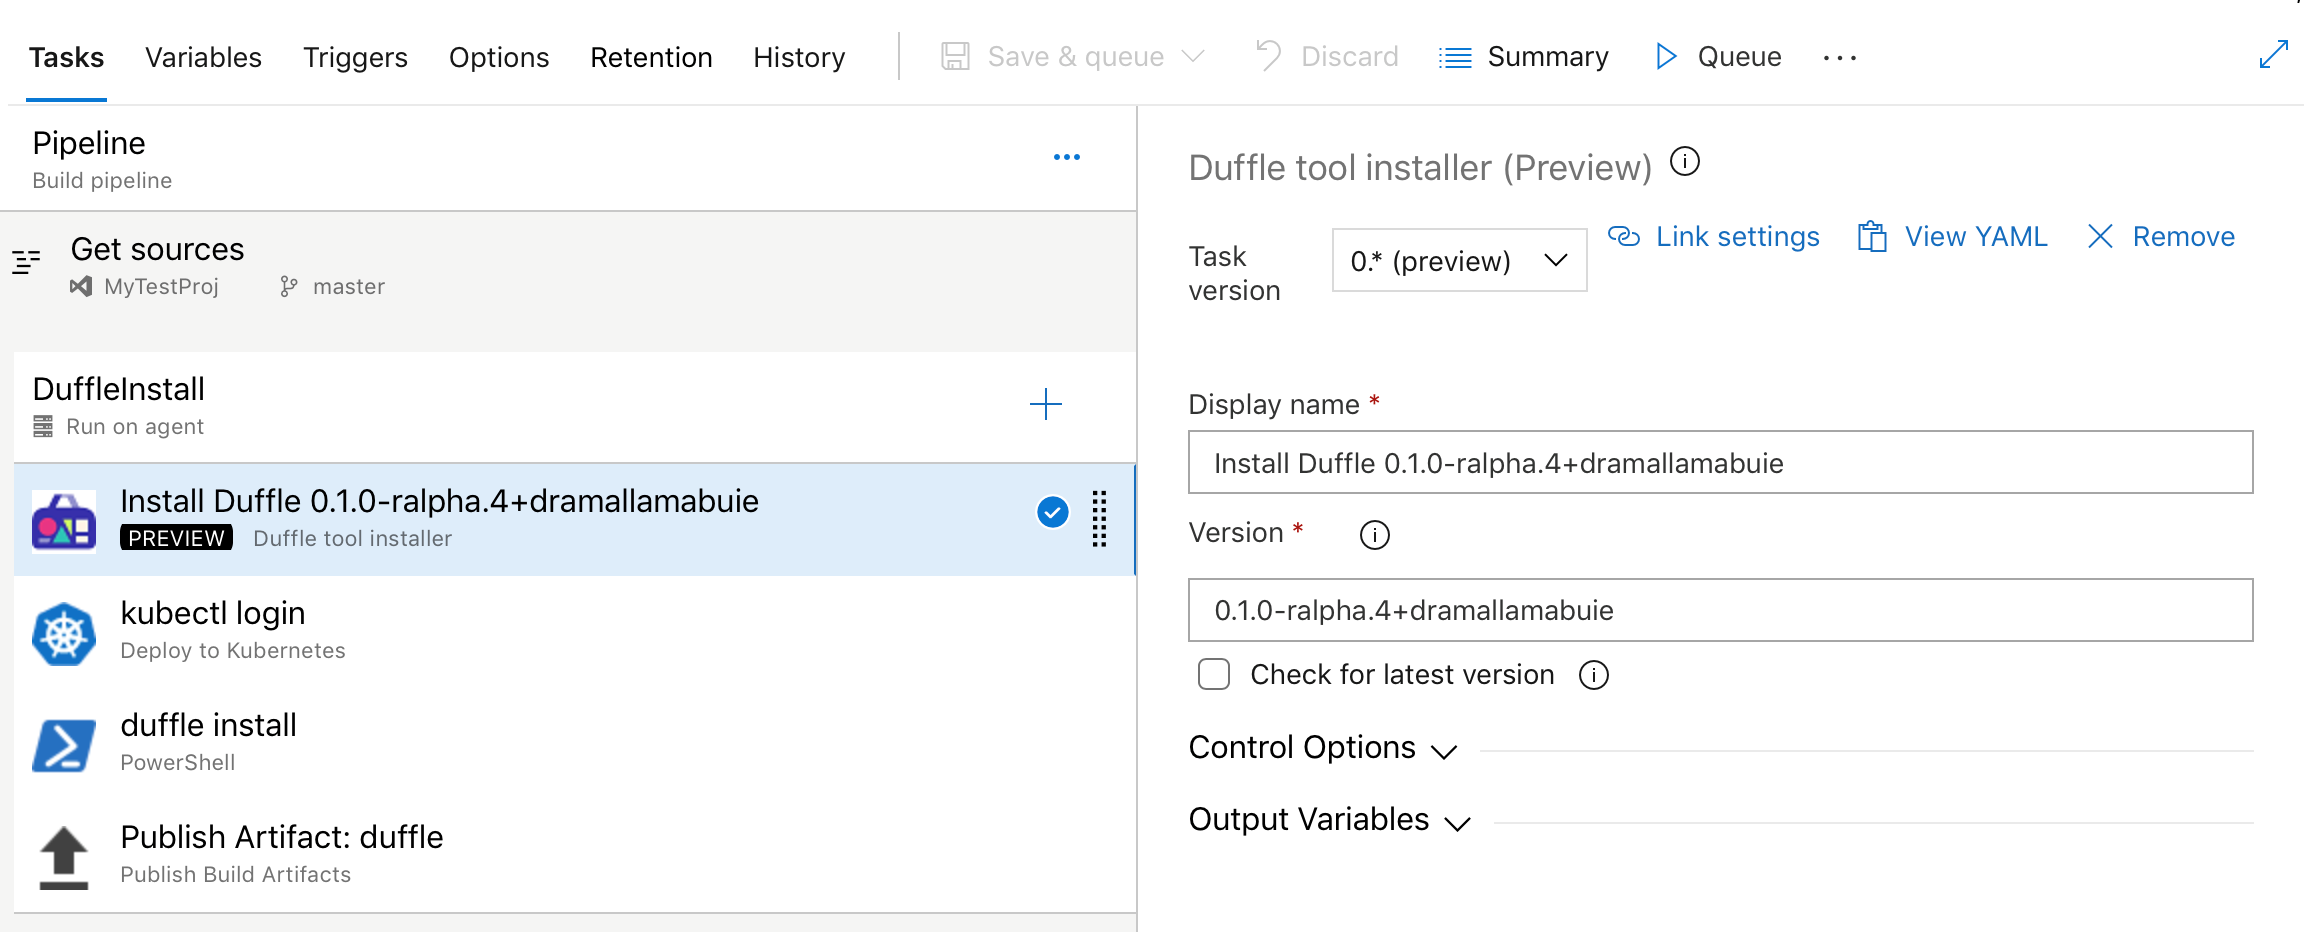 Duffle tool installer task in build and release pipeline.